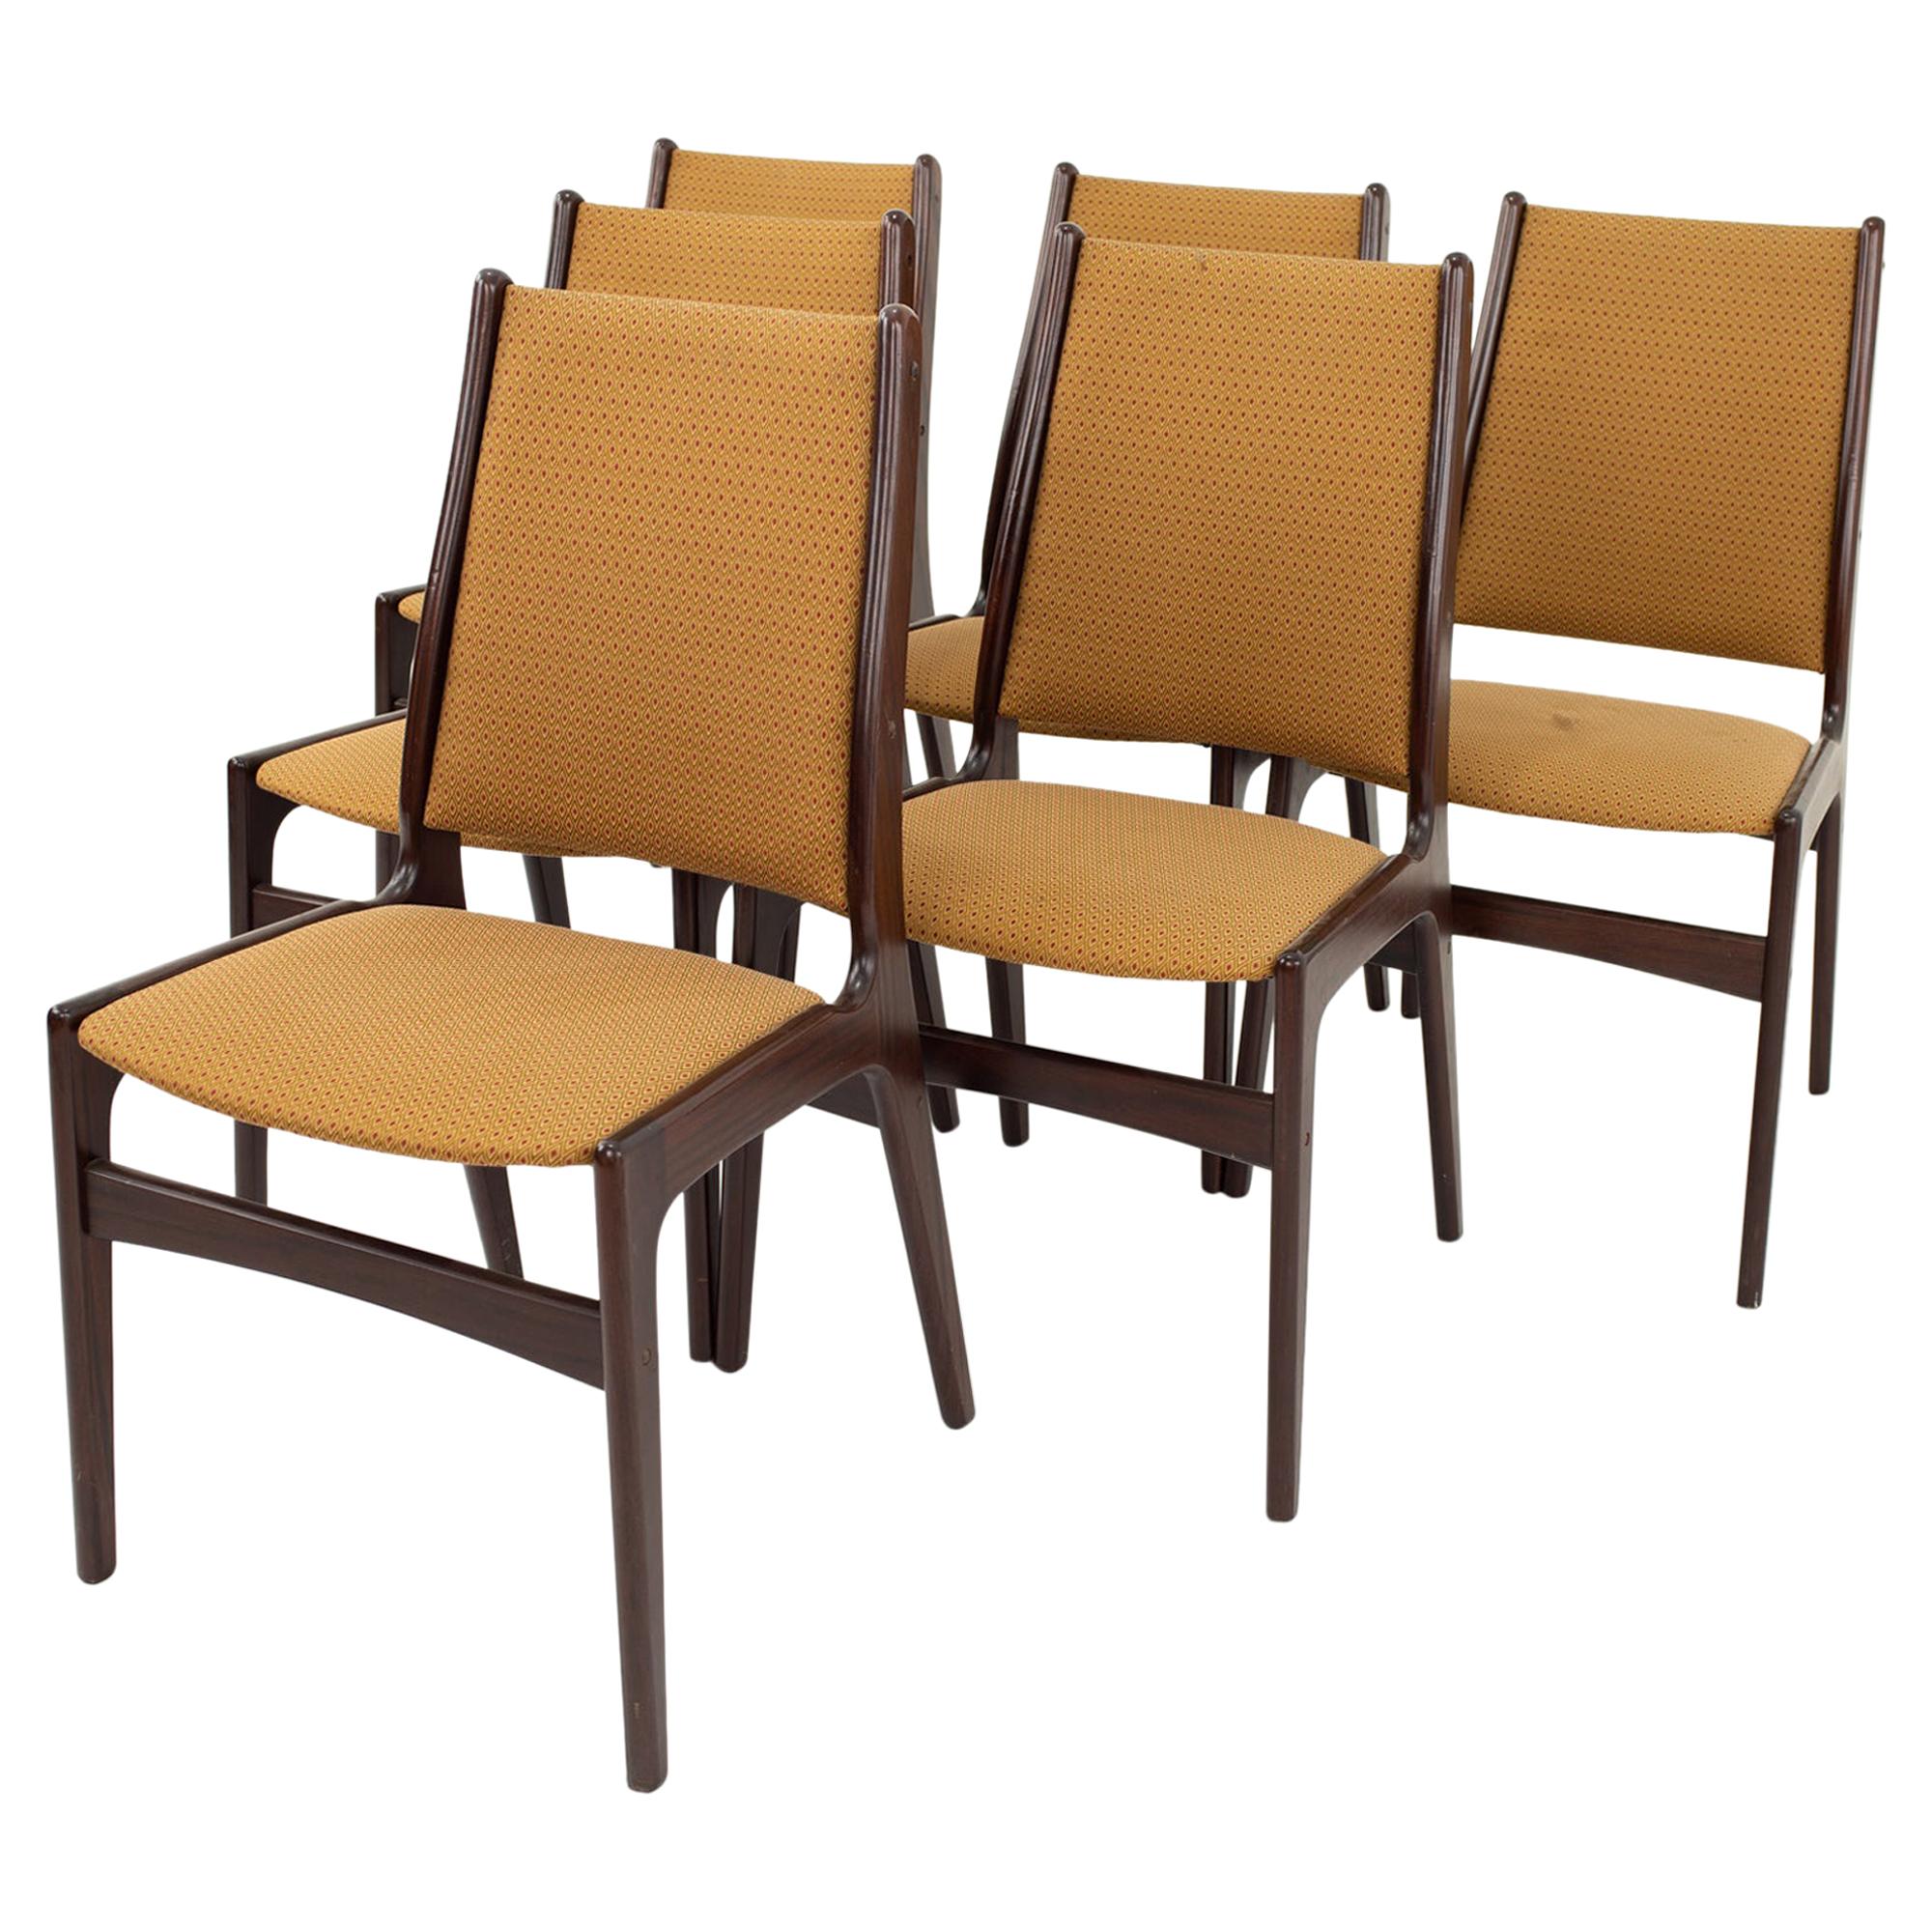 Danish Midcentury Rosewood Dining Chairs, Set of 6